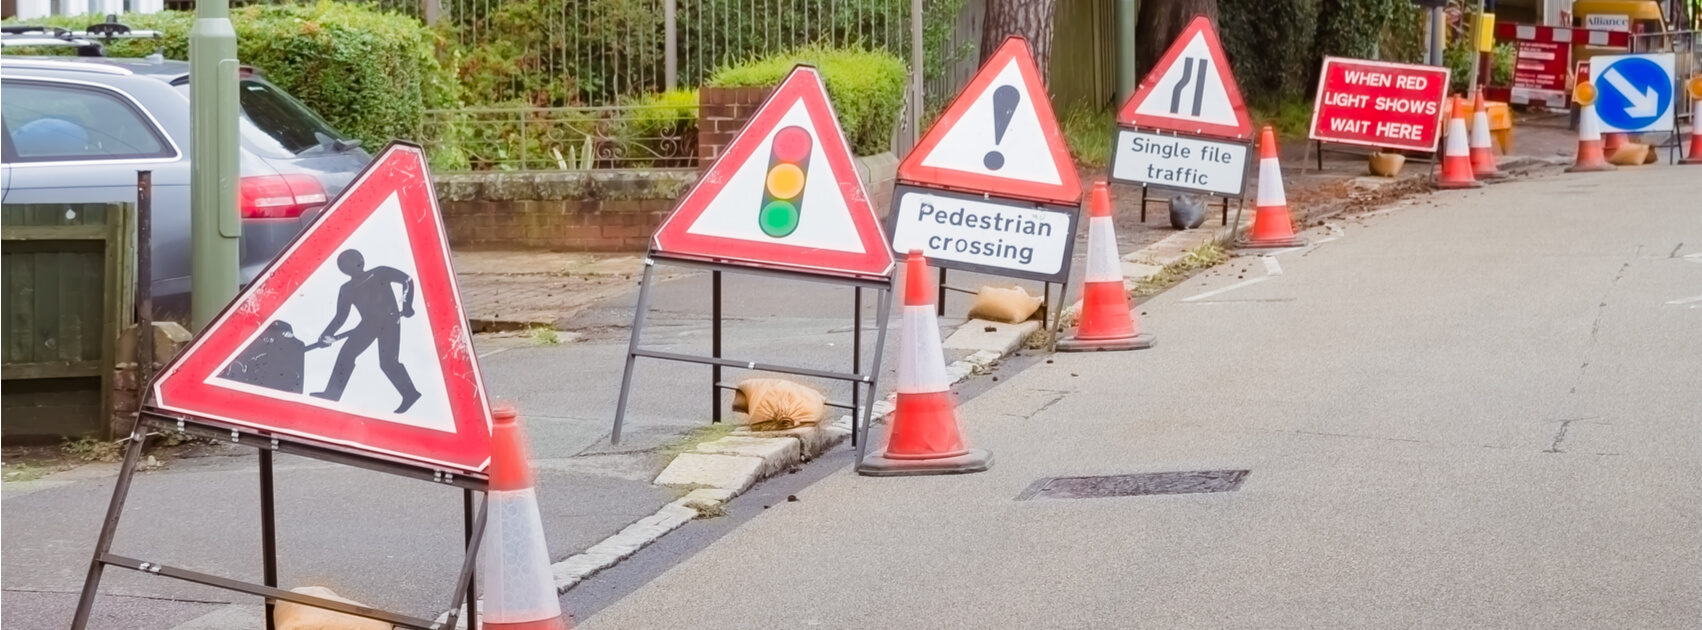 Think You Know Your Road Signs? Header Image